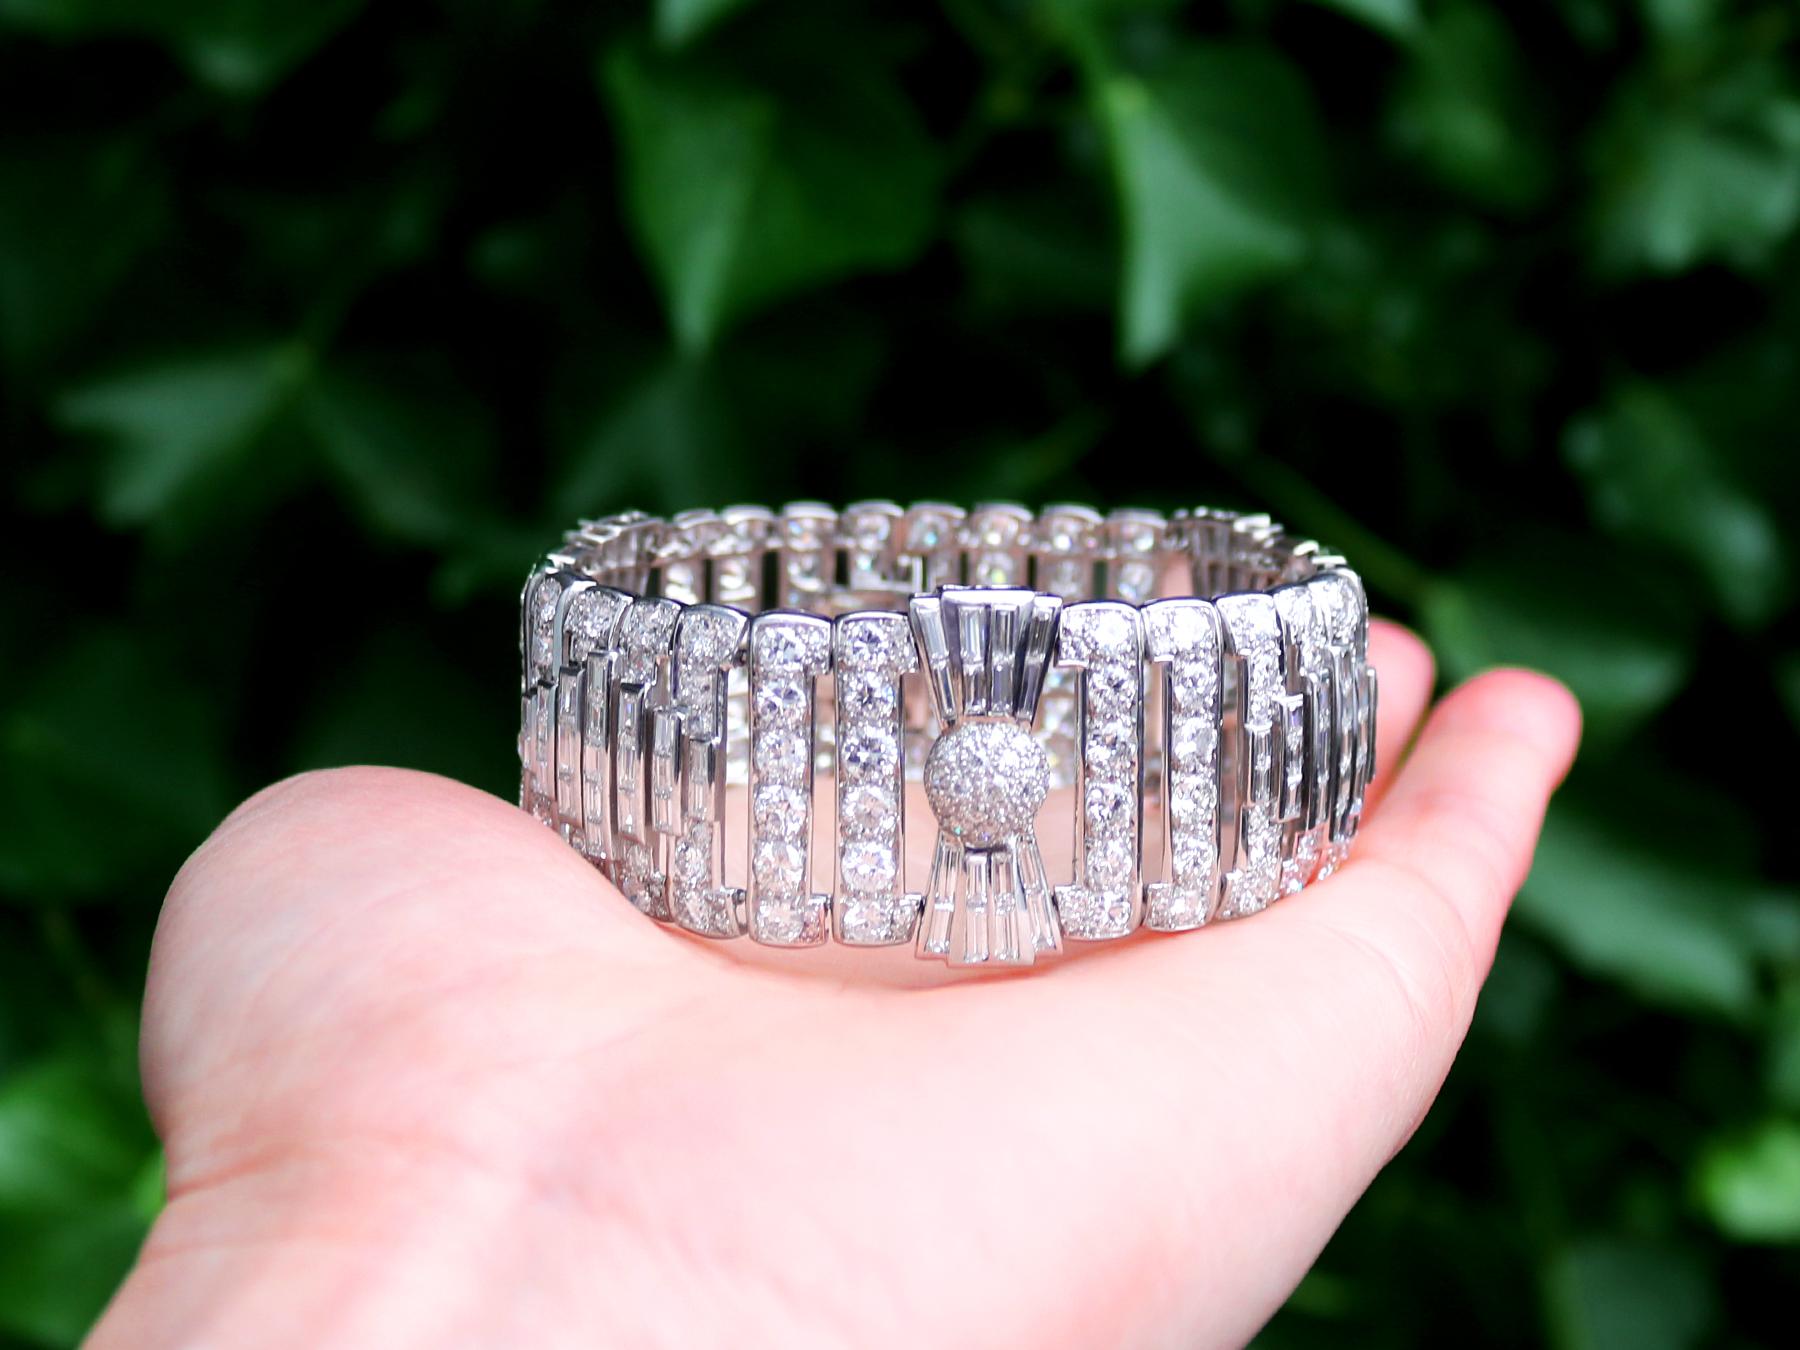 French Art Deco 29.42 Carat Diamond and 18k White Gold Bracelet In Excellent Condition For Sale In Jesmond, Newcastle Upon Tyne